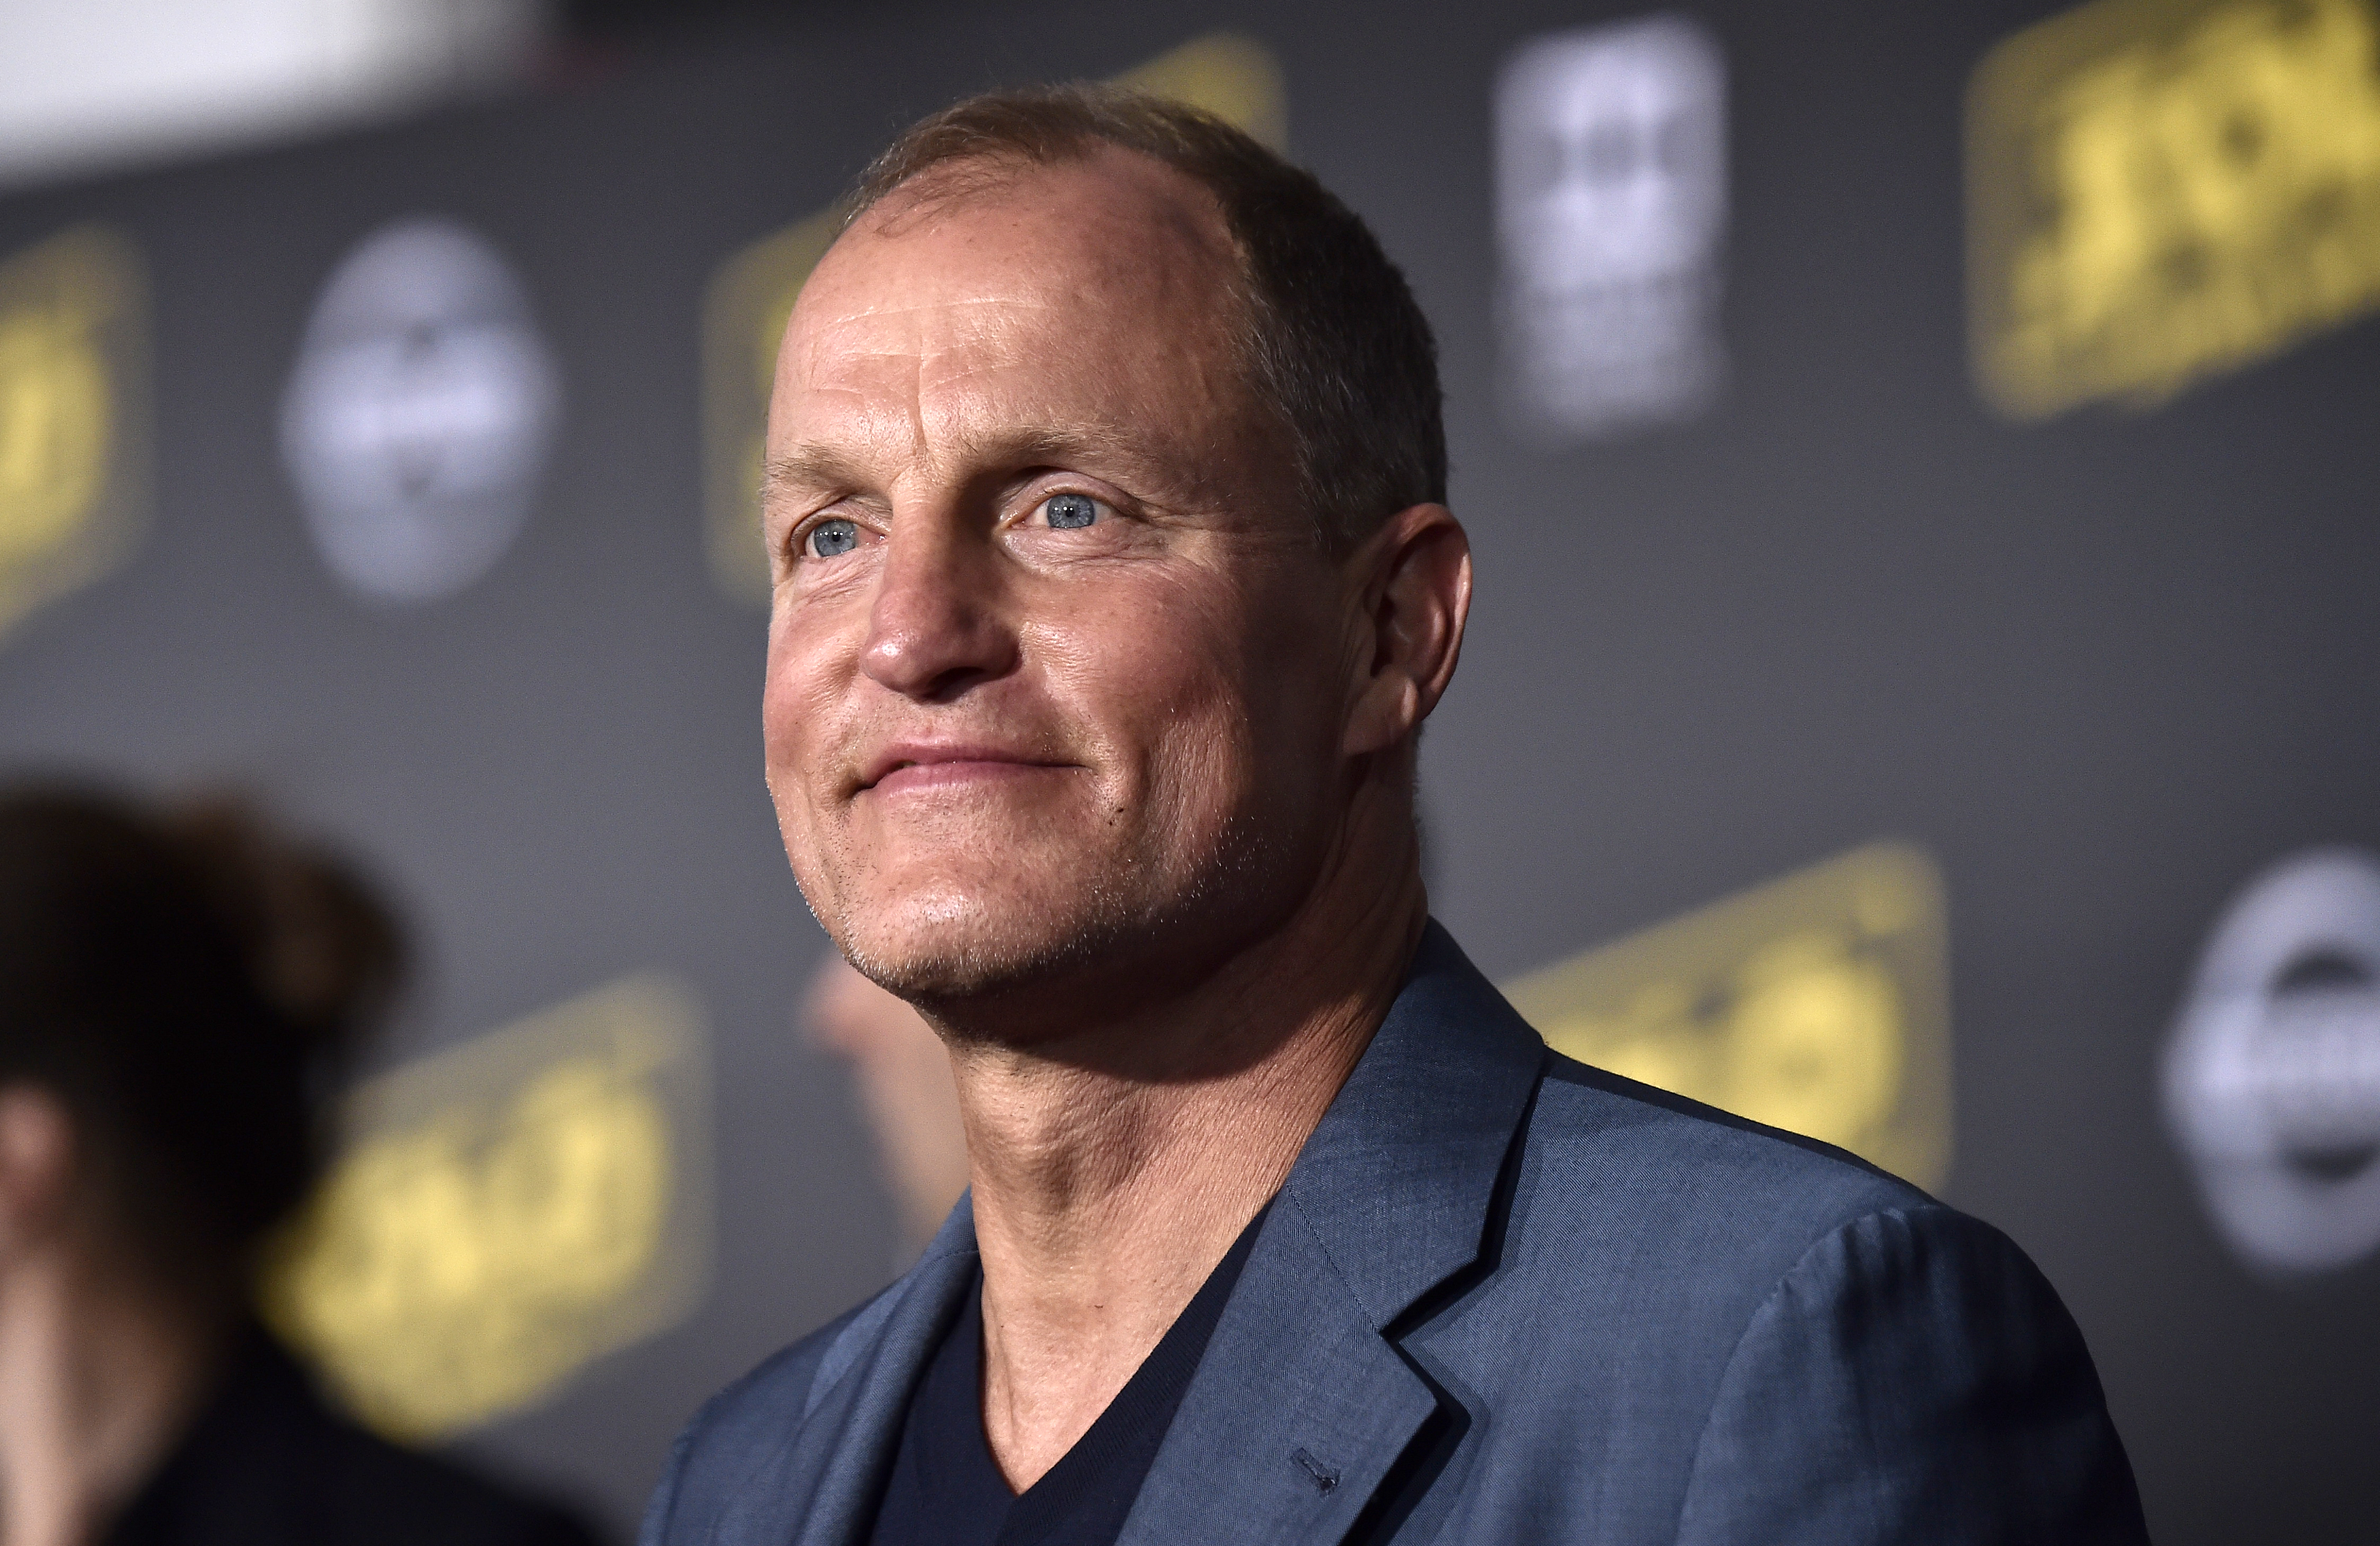 Woody Harrelson, 2018, actor in movies and TV shows